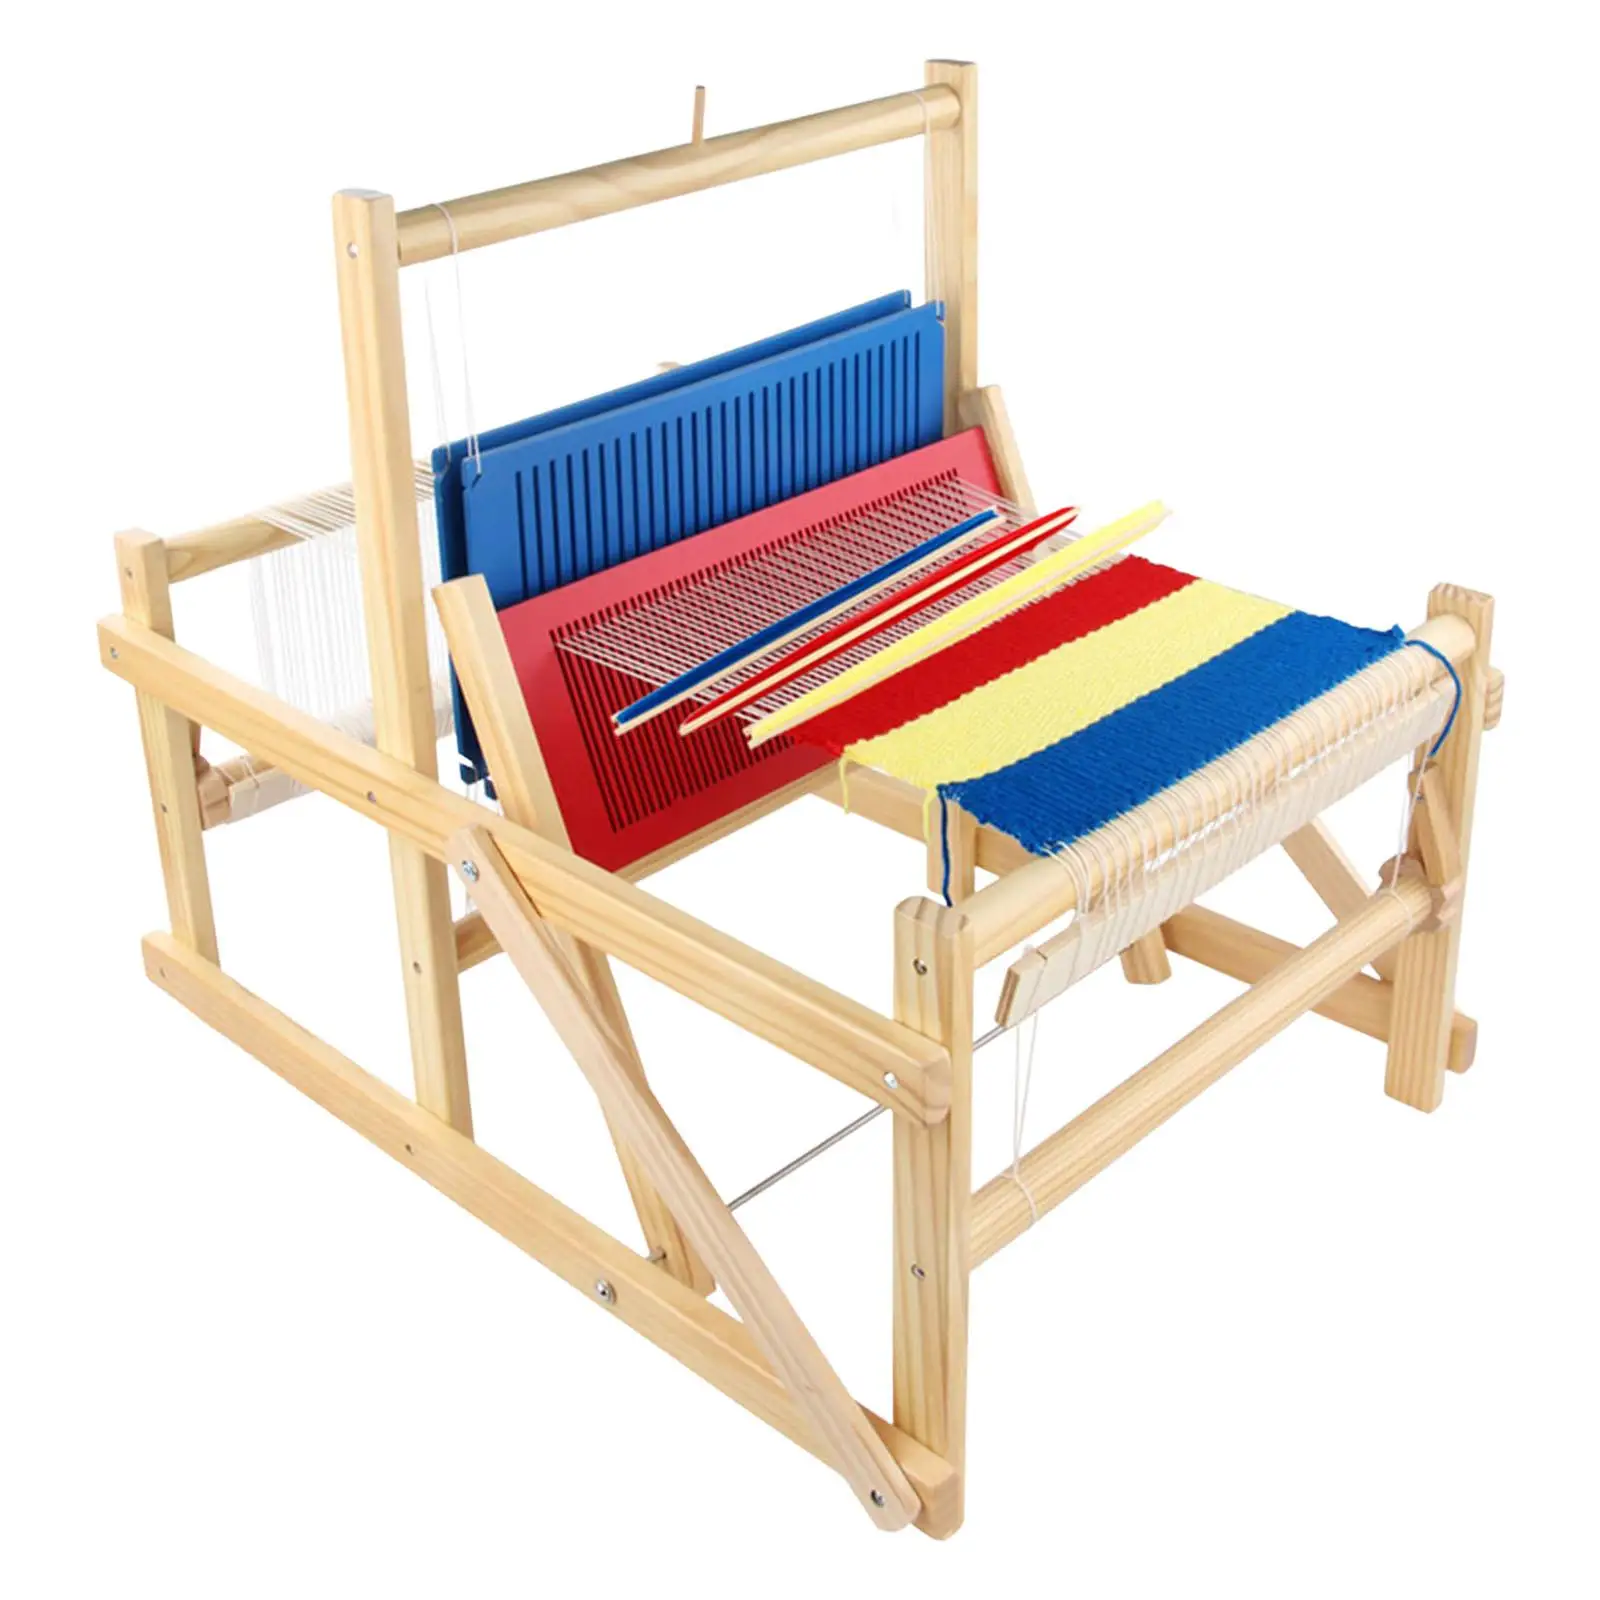 Standing Loom for Children And Adults Wooden Loom Educational Hand Loom Hand Knitting Handwork Intellectual Toys for Children